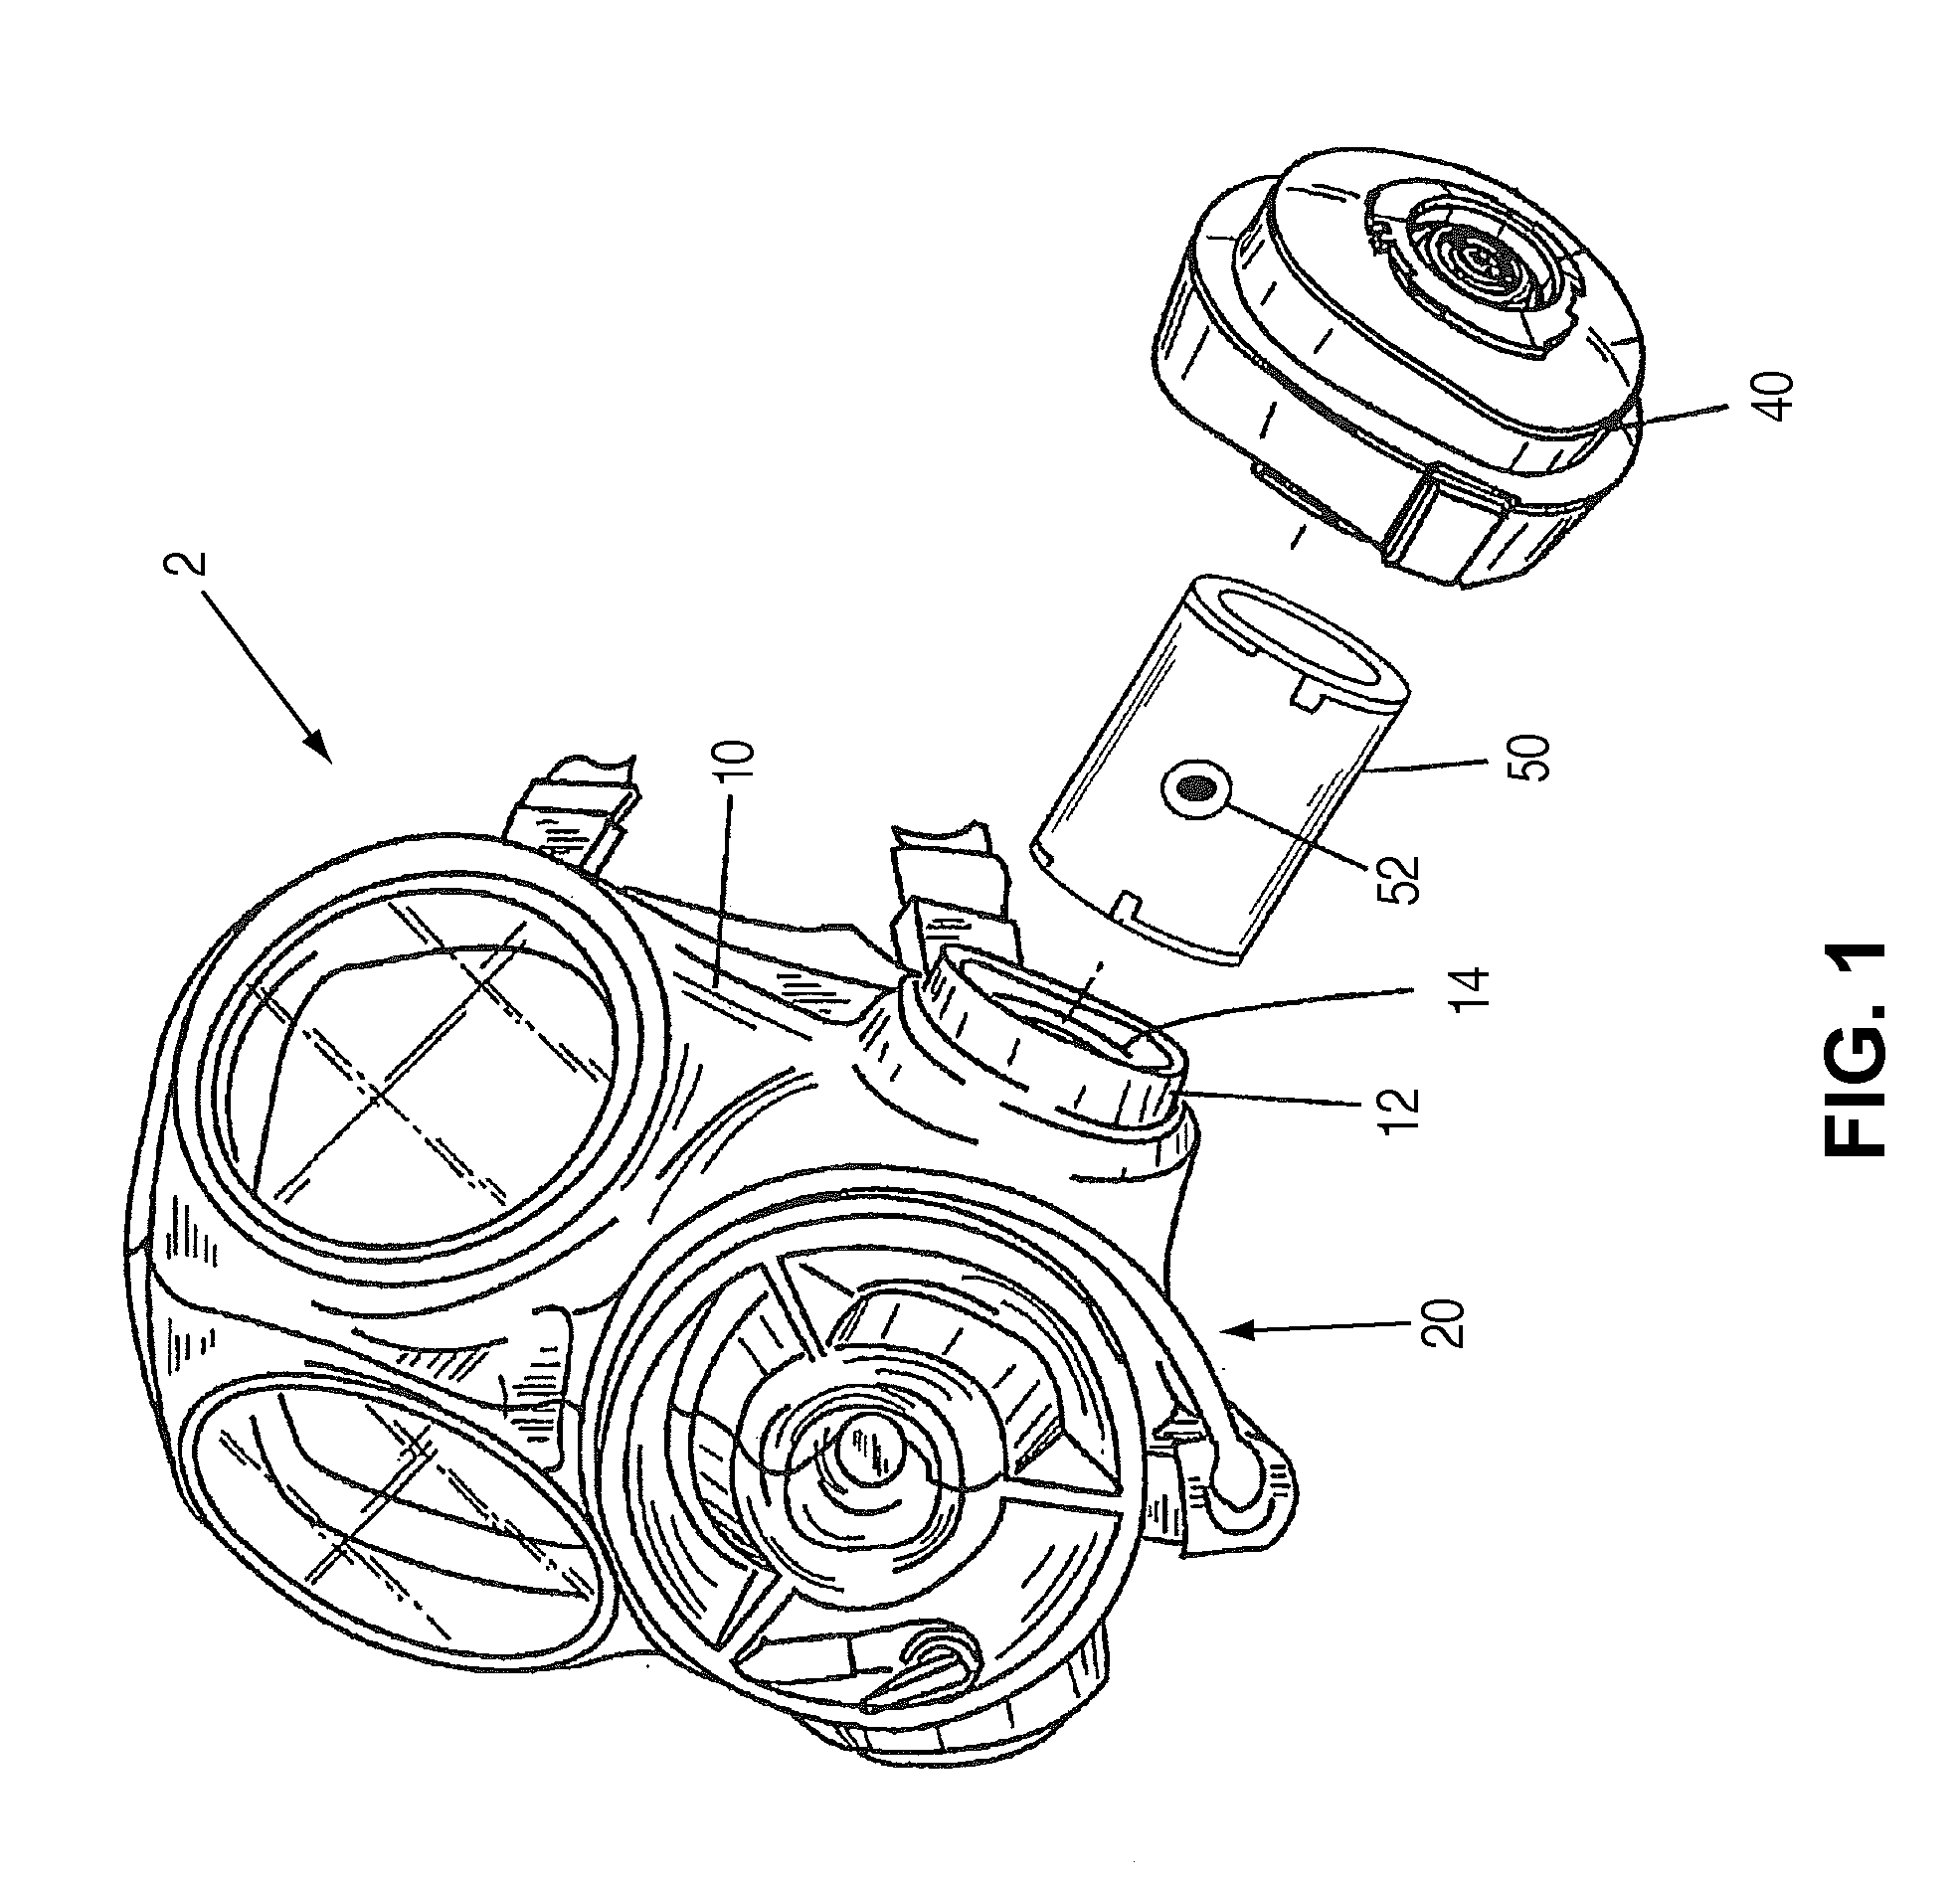 Breathing apparatus with ultraviolet light emitting diode